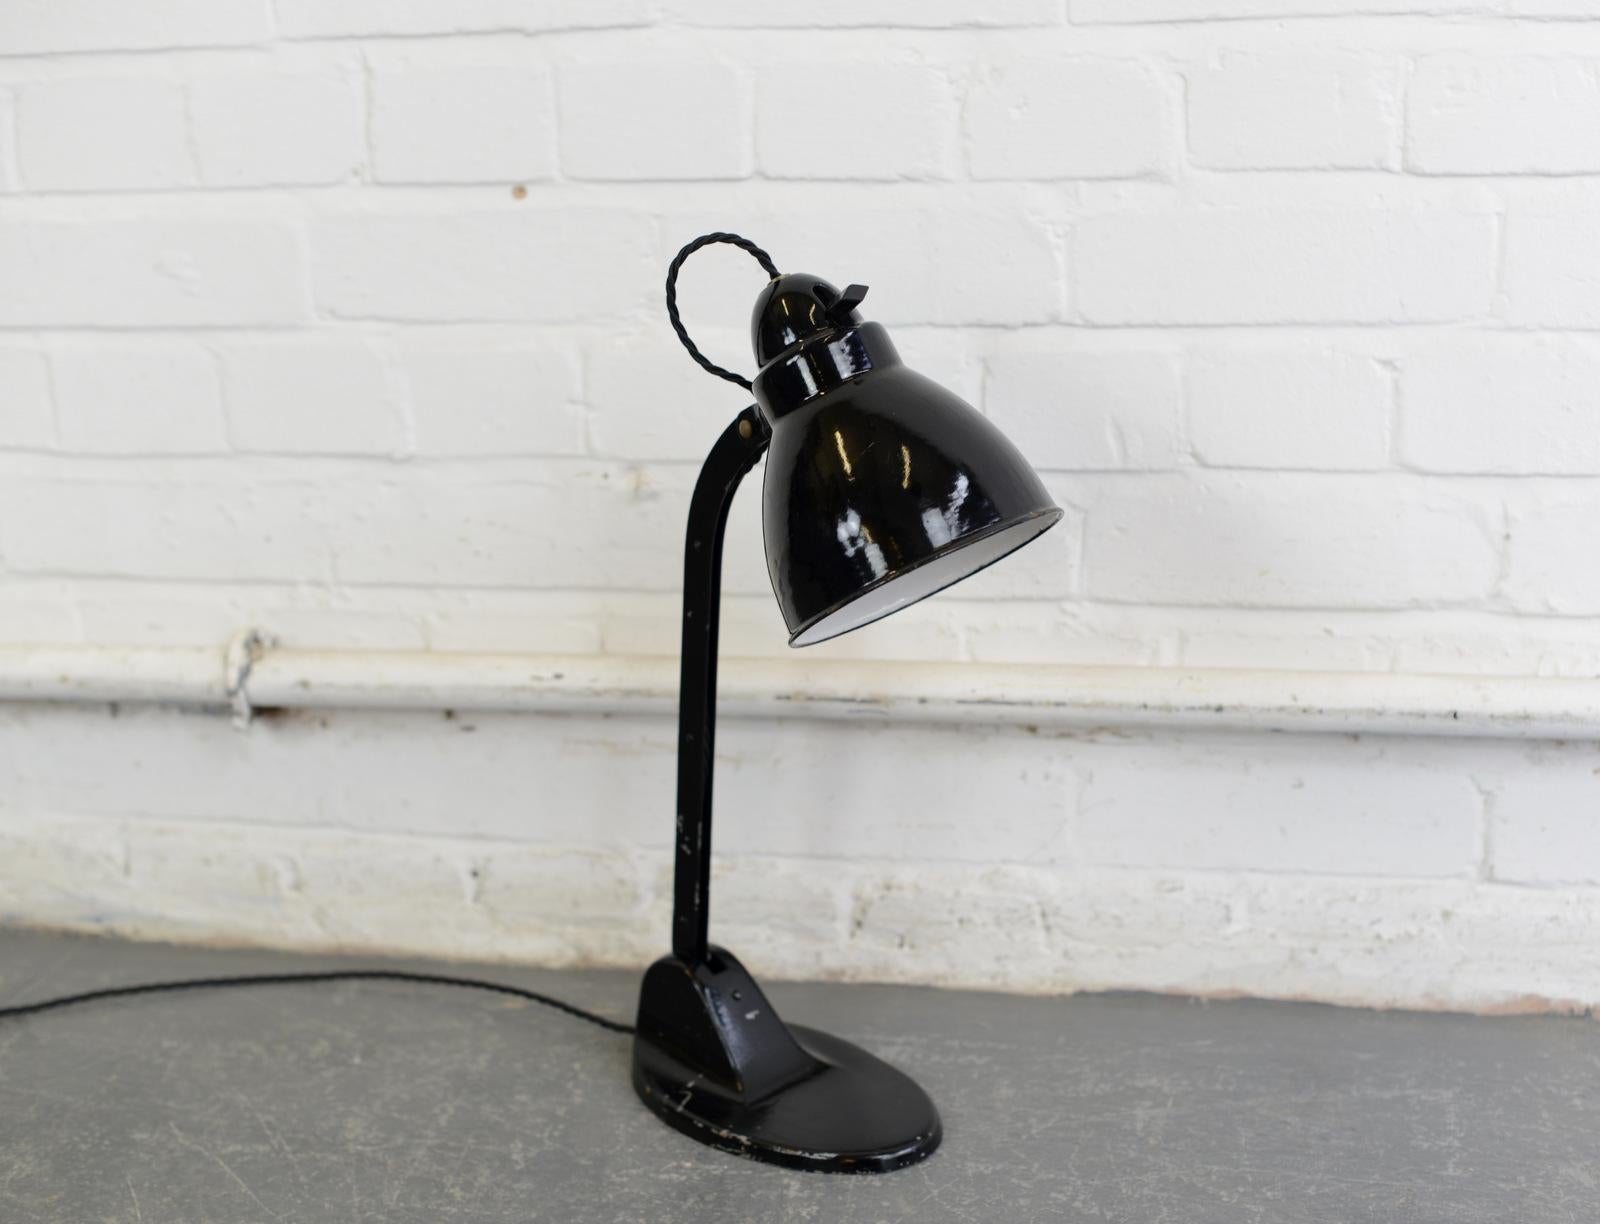 Desk lamp by Viktoria, circa 1930s.

- Vitreous enamel shade
- Adjustable arm and shade
- Cast iron base
- Takes E27 fitting bulbs
- Original bulb holder and switch
- Embossed Viktoria Lampe on the base
- German, 1930s.
- Measures: 46 cm